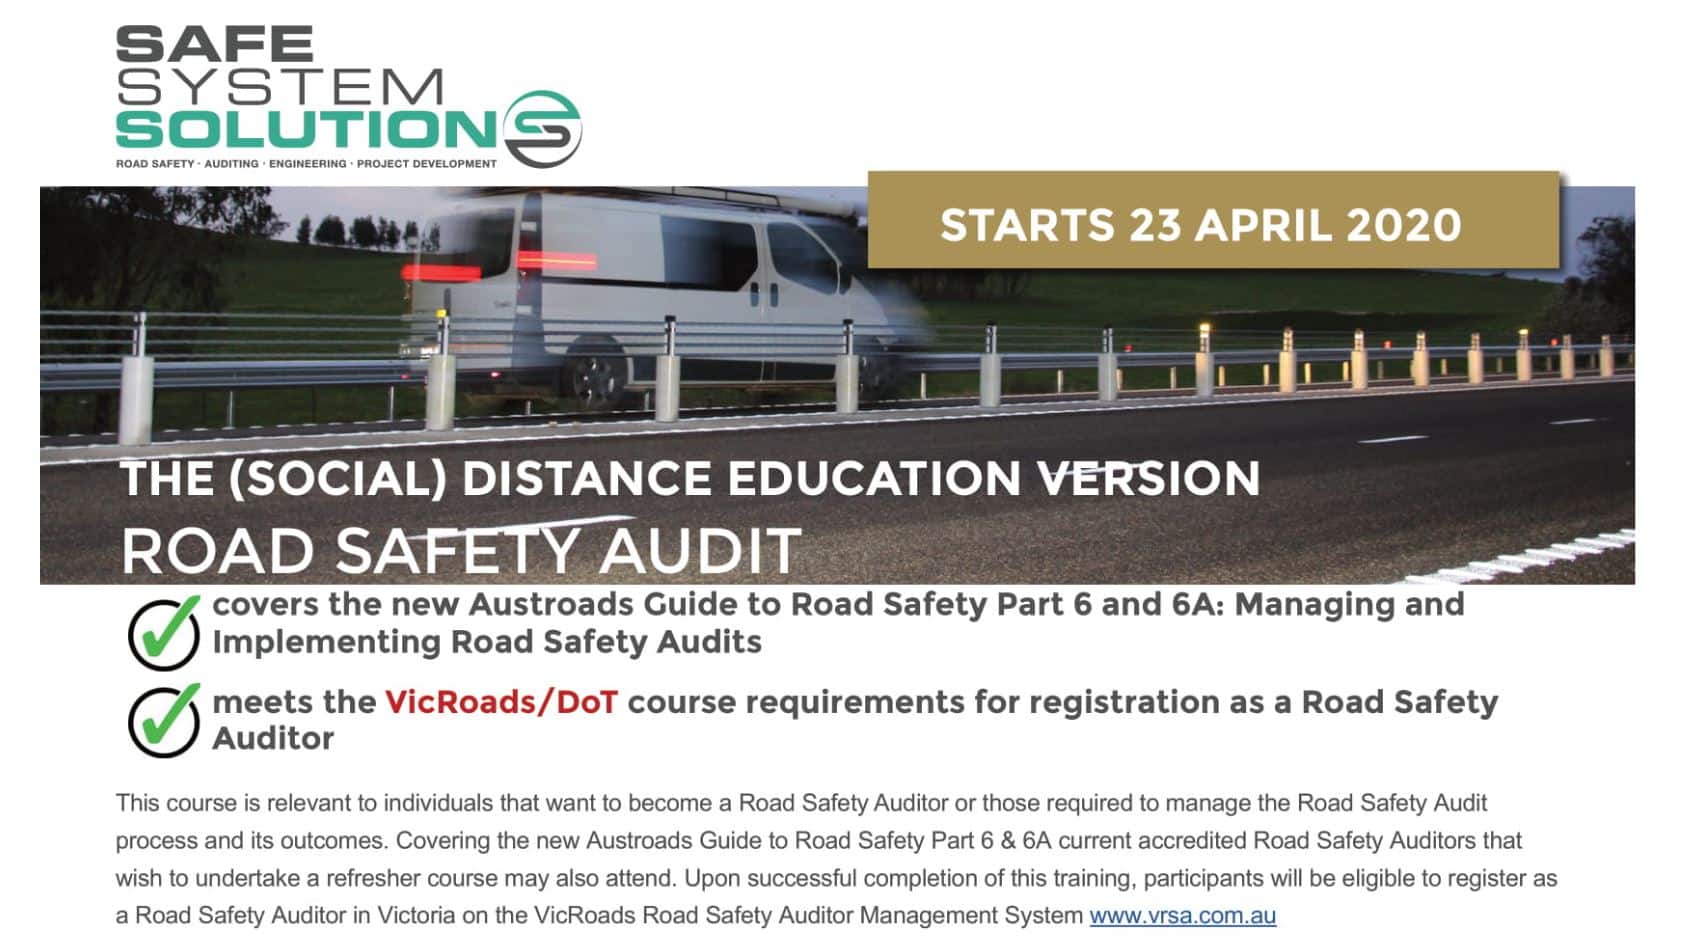 Road Safety Audit (RSA) training – (Social) Distance Education